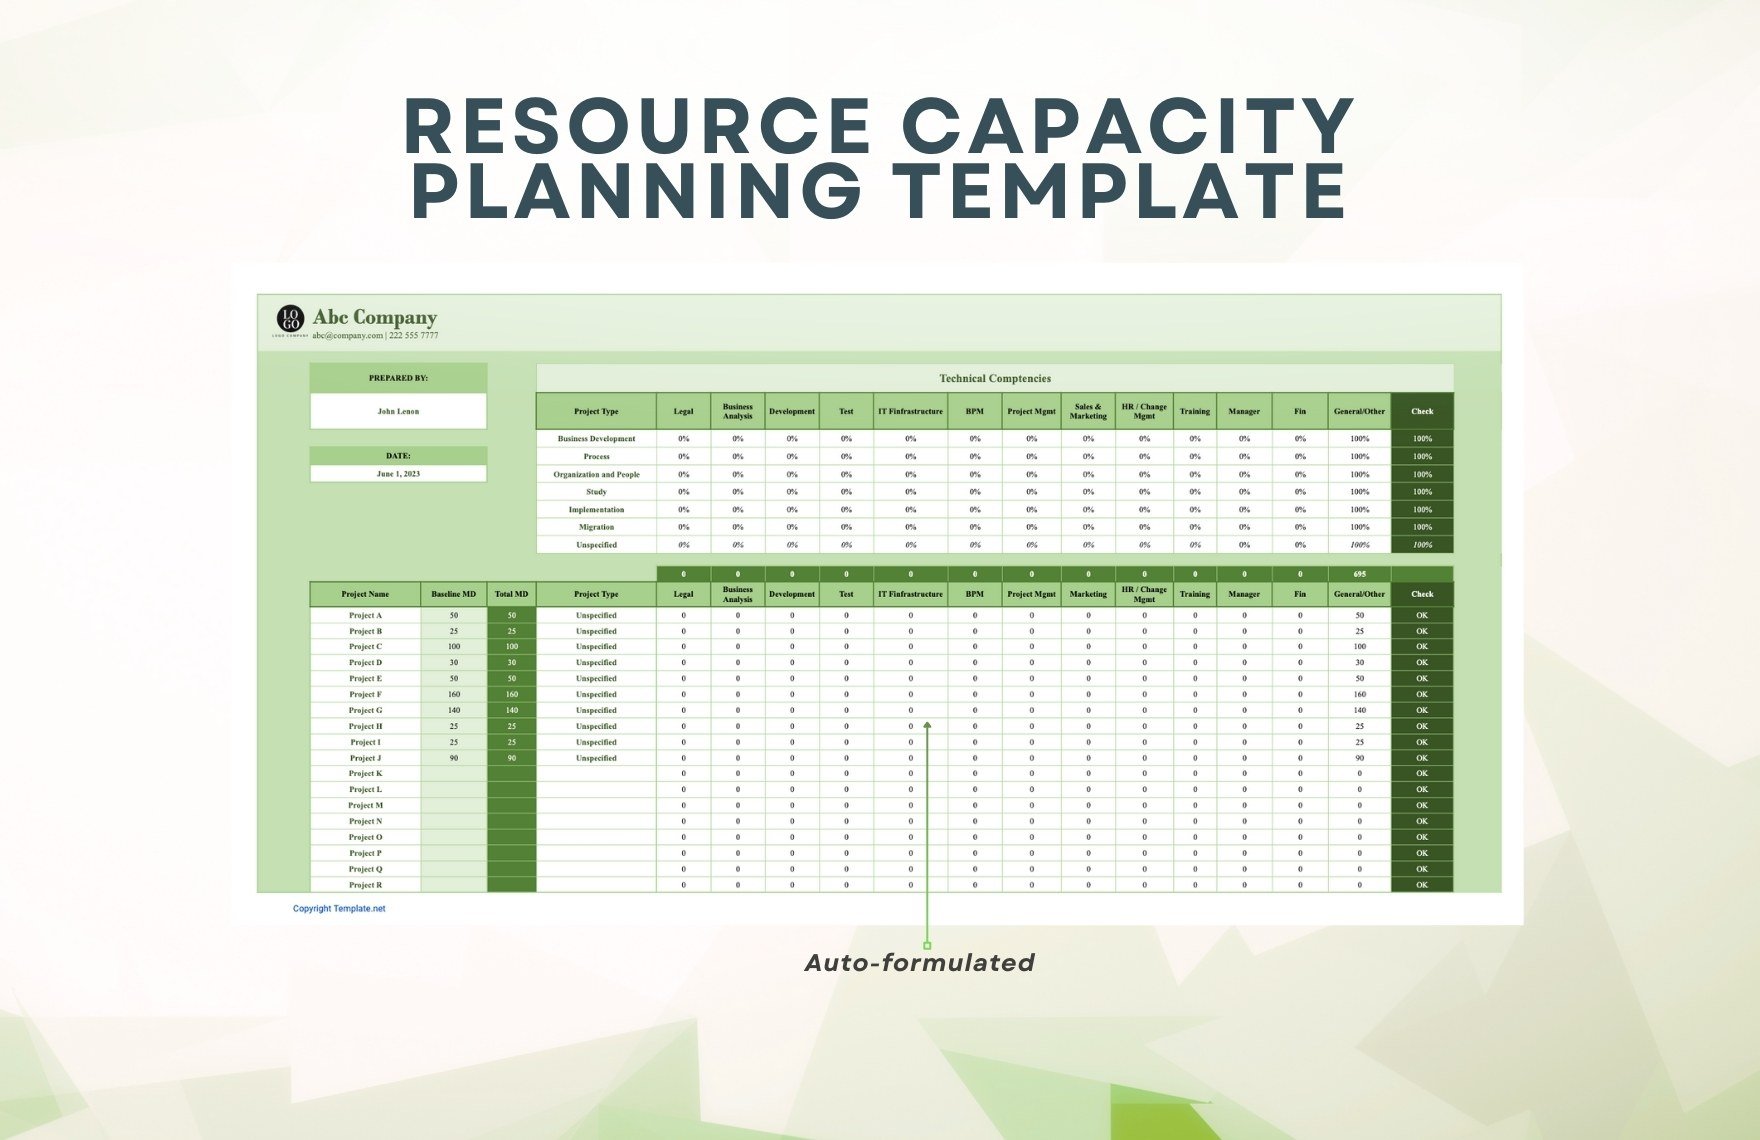 Resource Capacity Planning Template